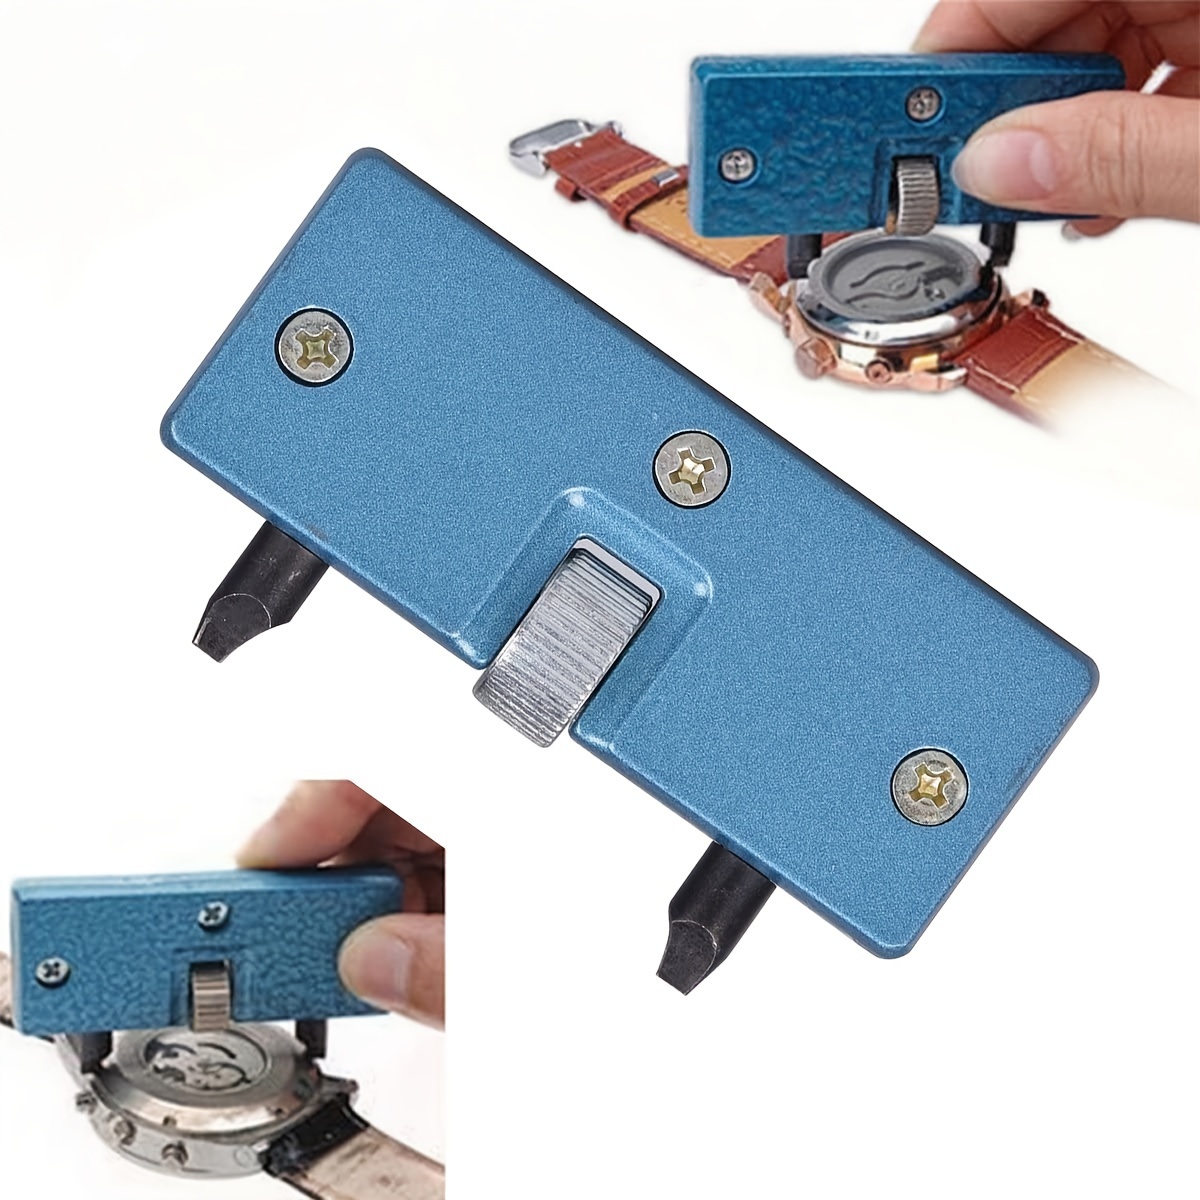 Adjustable Watch Repair Tool - Shop on Our Store